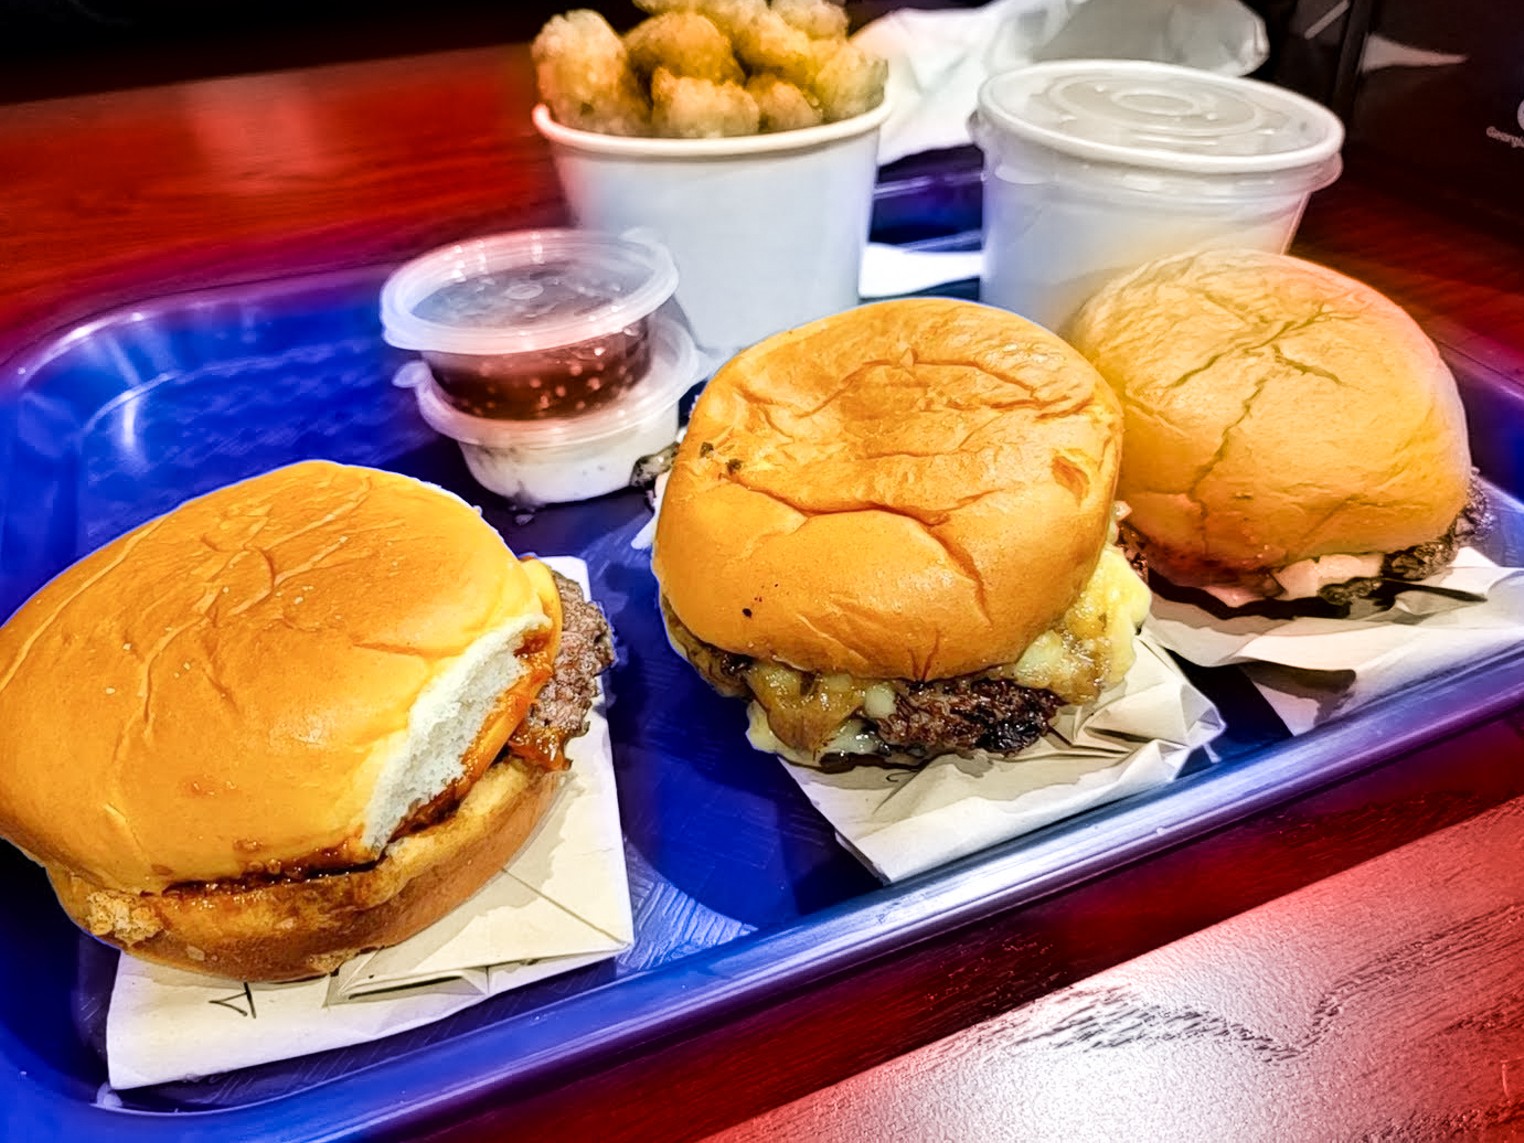 First Look: Bizzy Burger Enters the Dallas Burger Wars